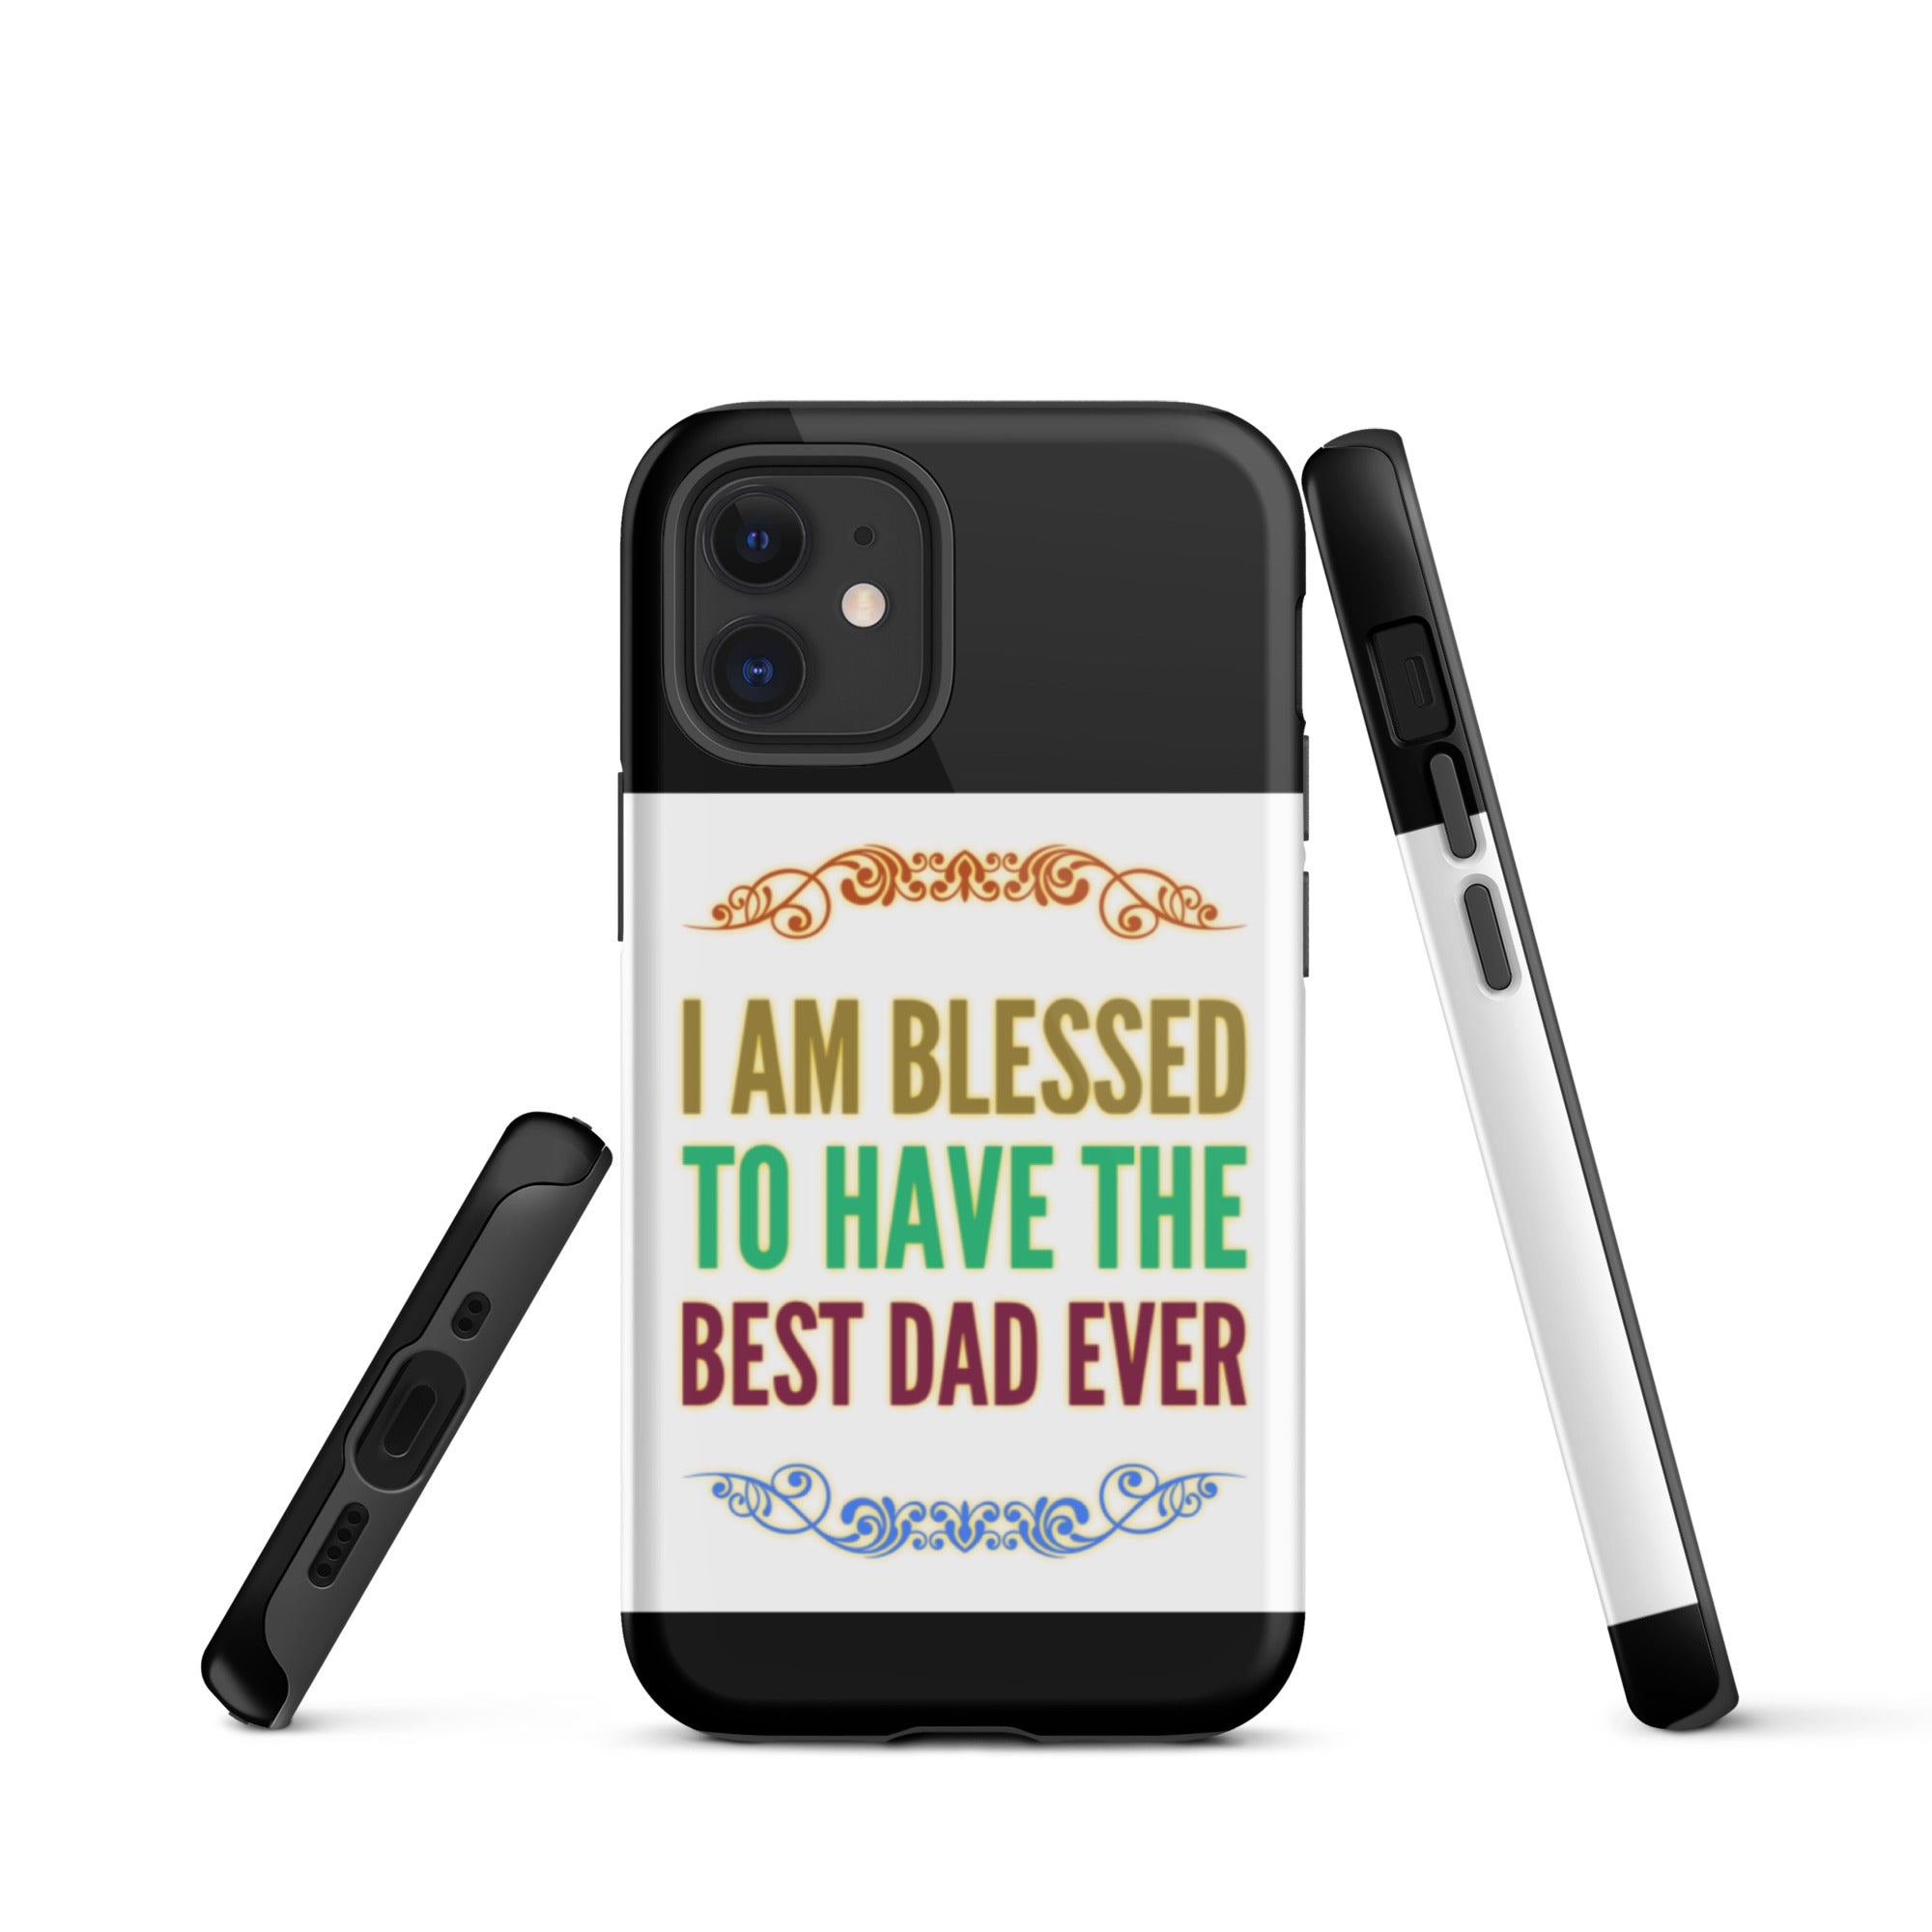 GloWell Designs - Tough iPhone Case - Affirmation Quote - Gift - Best Dad Ever - GloWell Designs